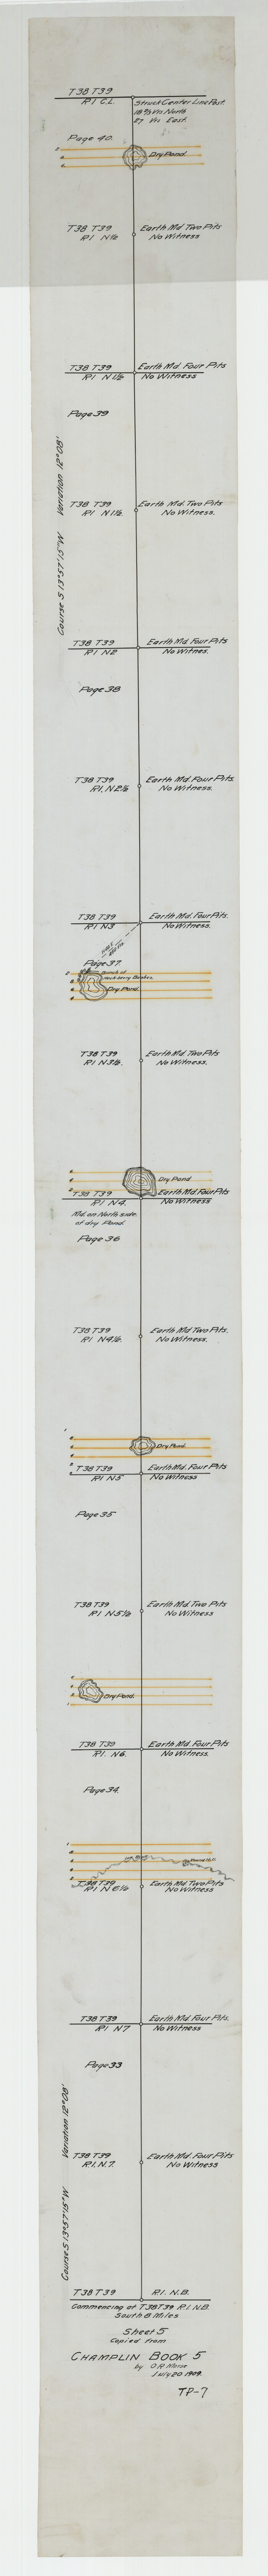 93180, Sheet 5 copied from Champlin Book 5 [Strip Map showing T. & P. connecting lines], Twichell Survey Records